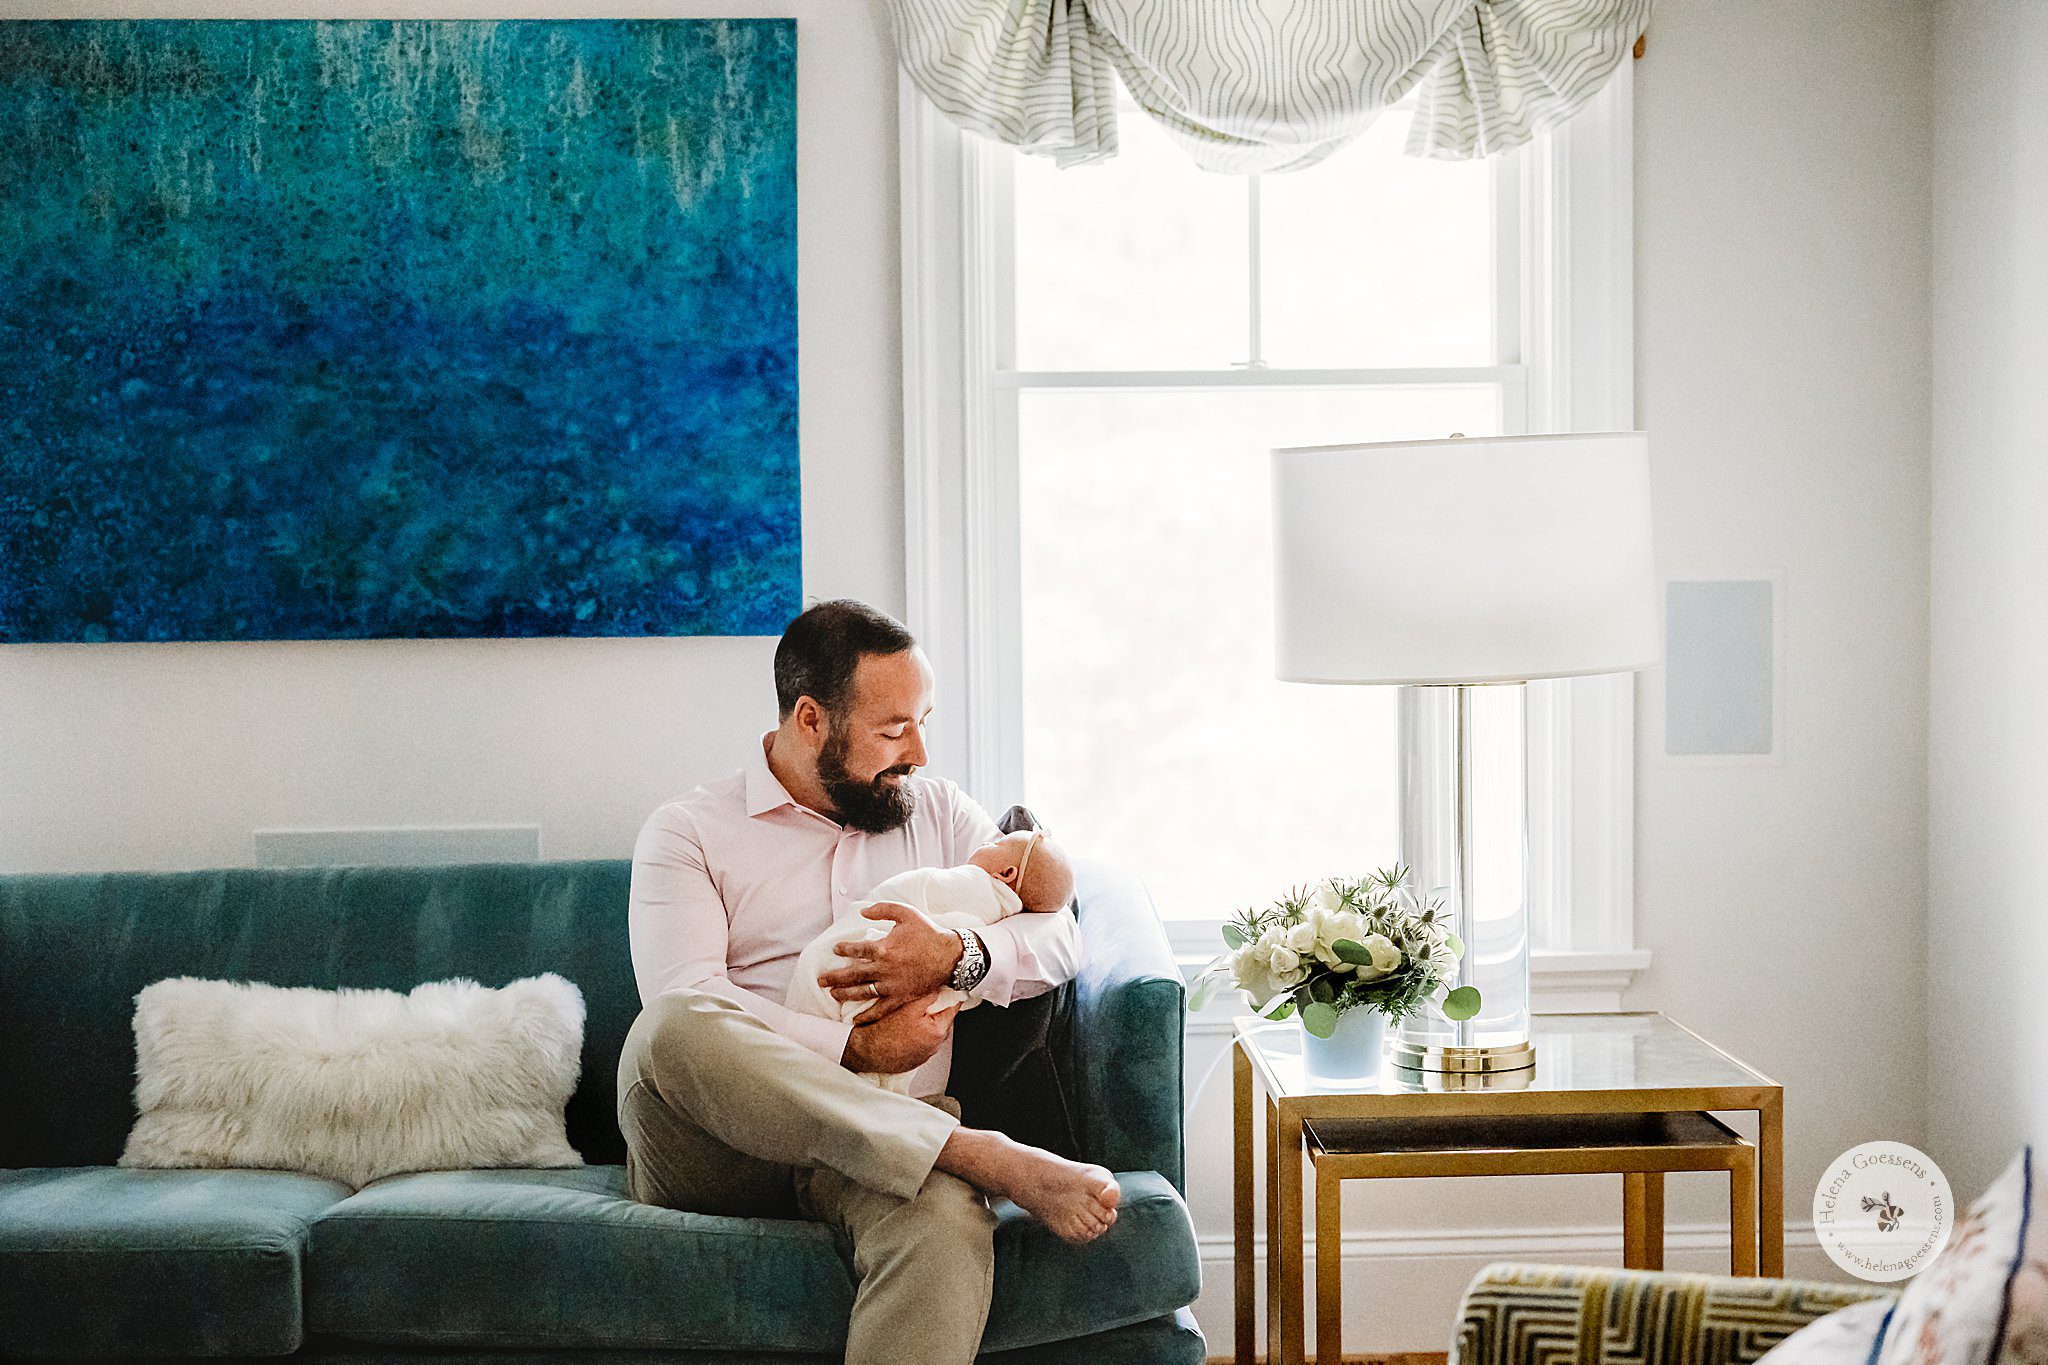 dad sits on couch holding newborn daughter in arms during lifestyle photos at home 